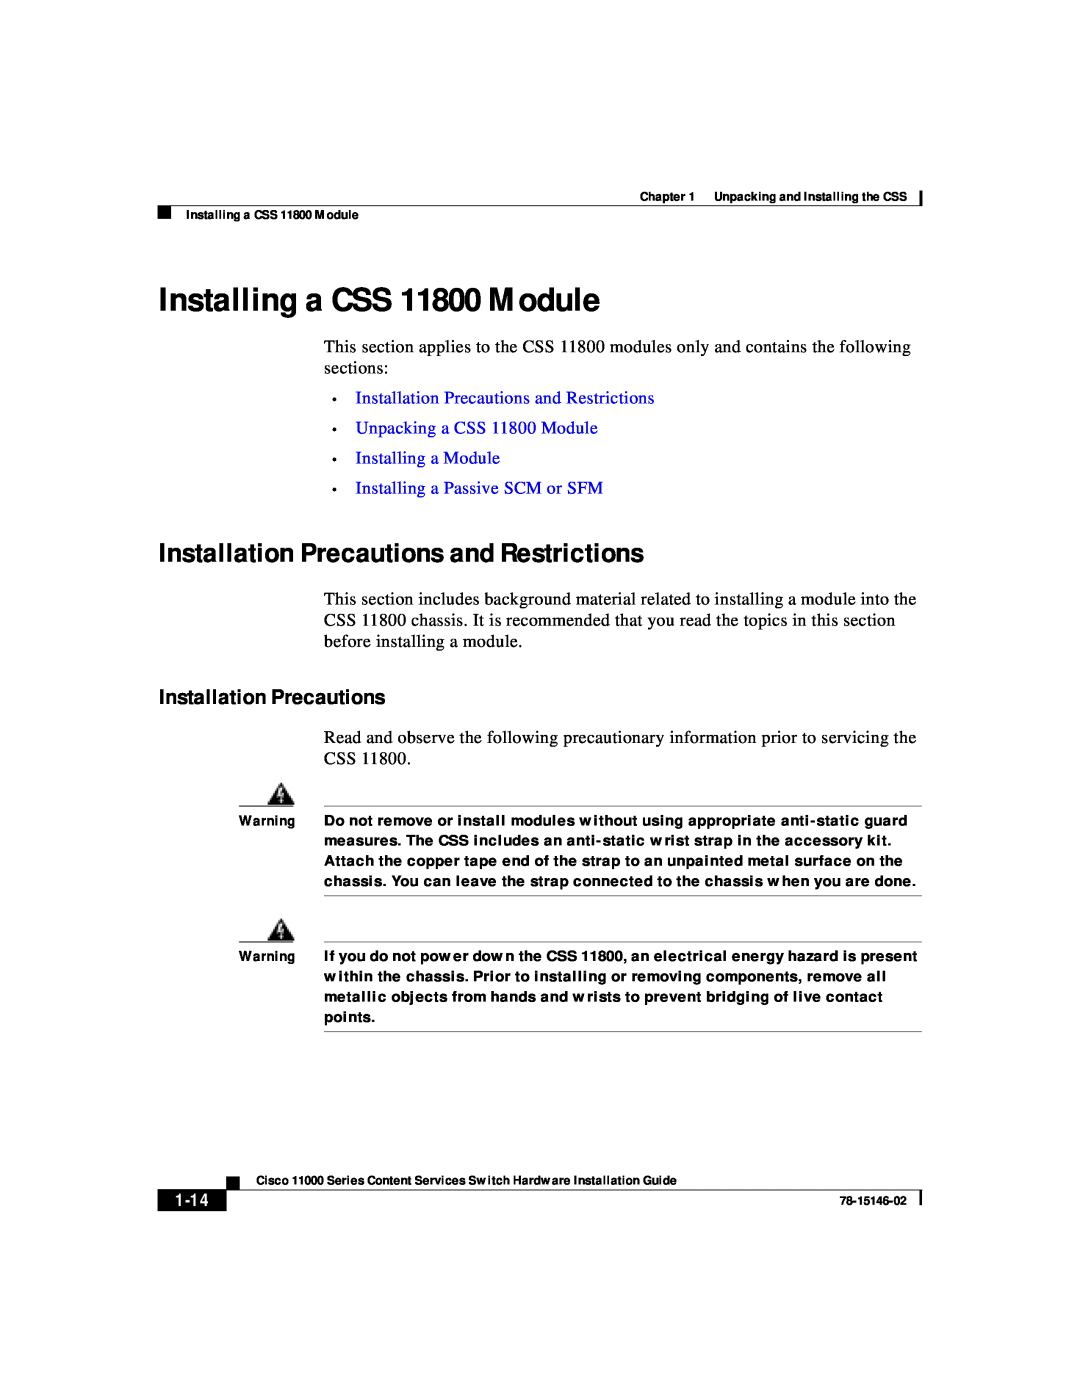 Cisco Systems 11000 Series manual Installing a CSS 11800 Module, Installation Precautions and Restrictions, 1-14 